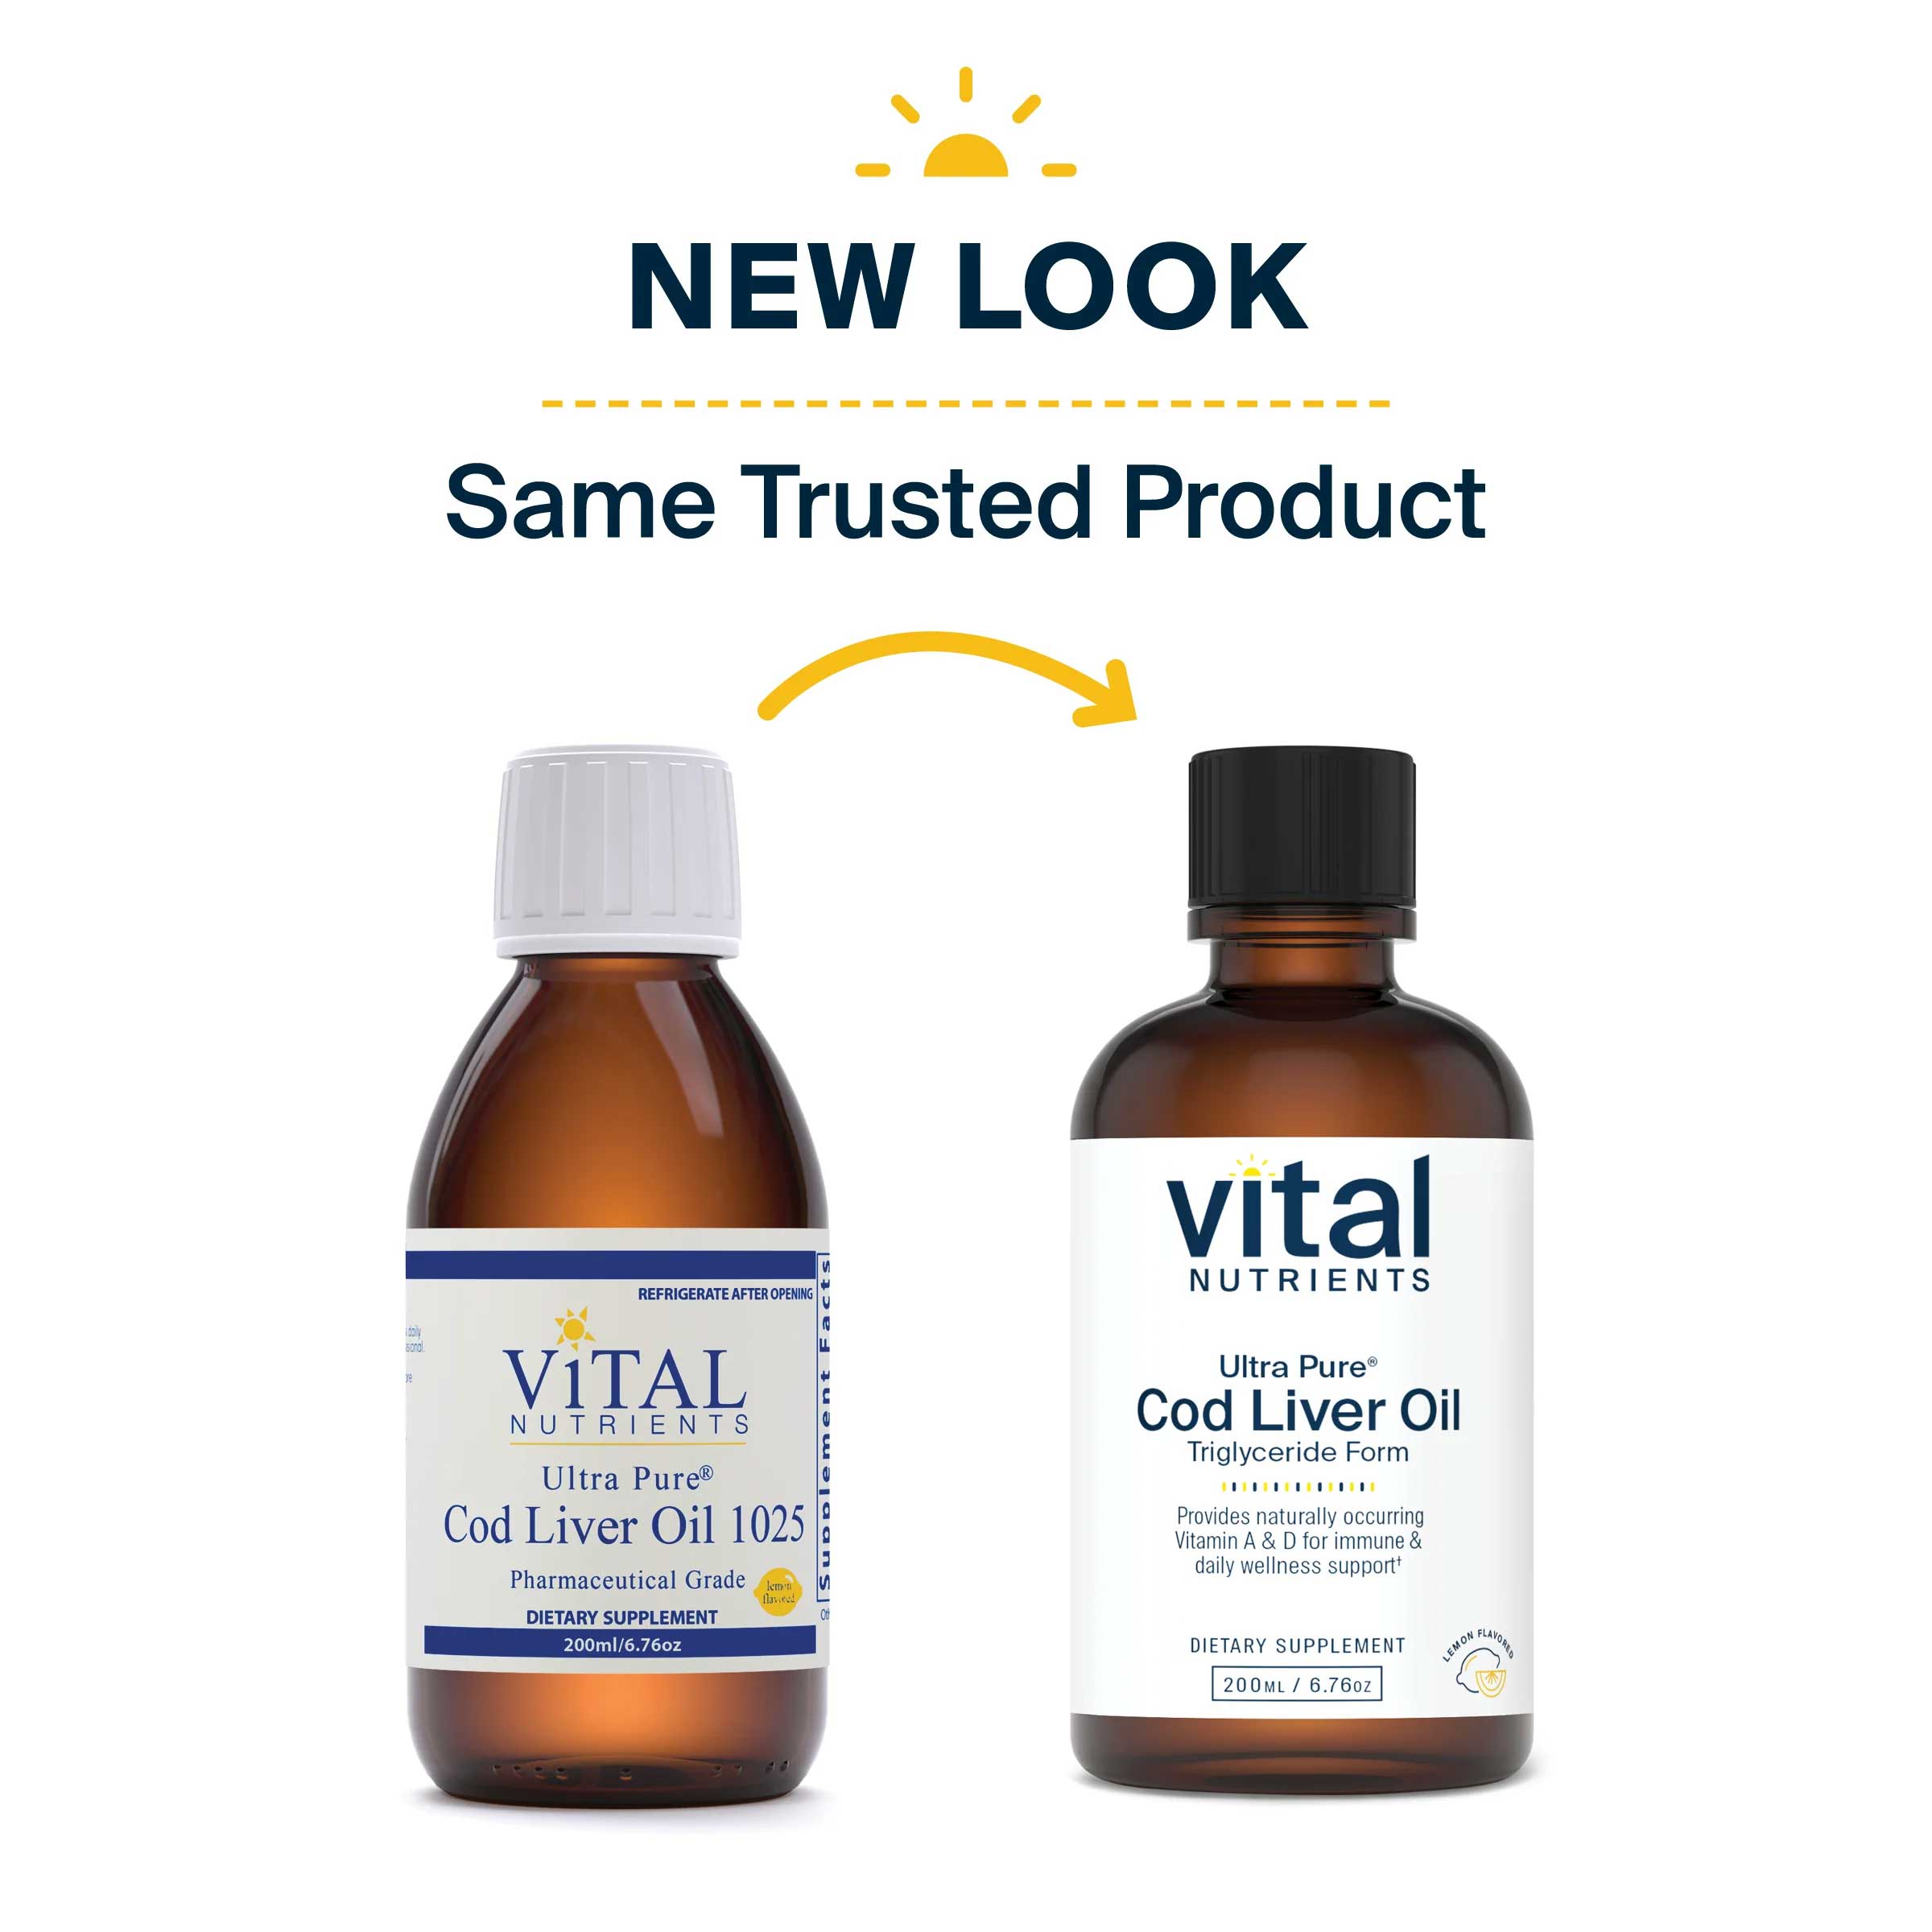 Vital Nutrients Ultra Pure® Cod Liver Oil 1025 New Look